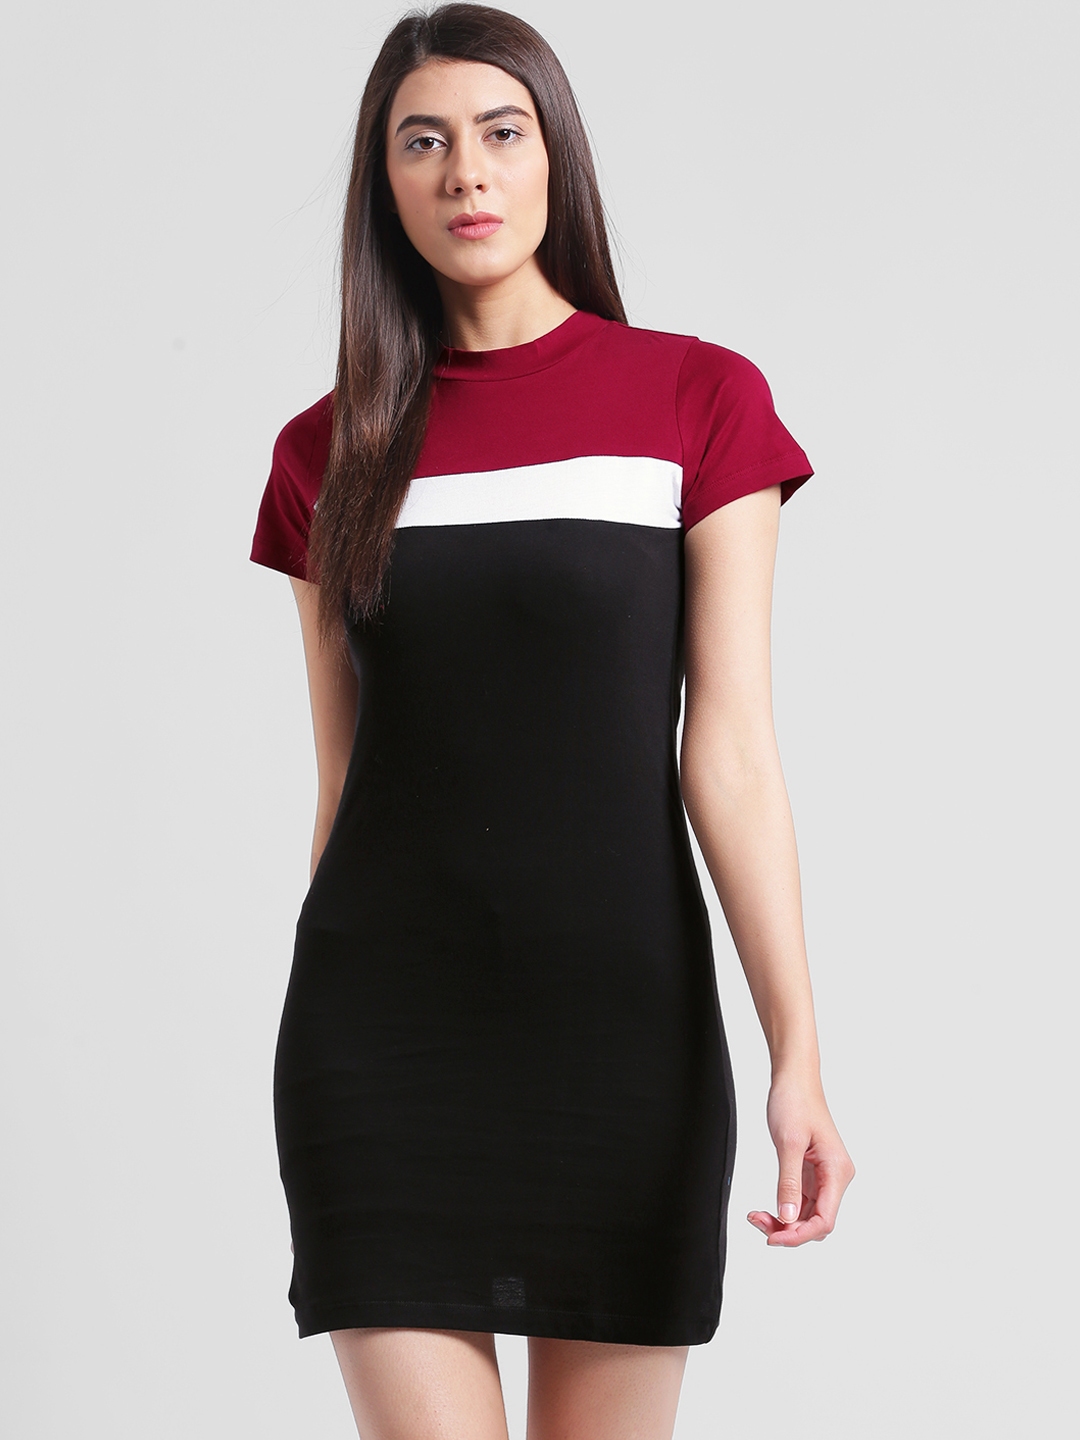 maroon t shirt dress outfit